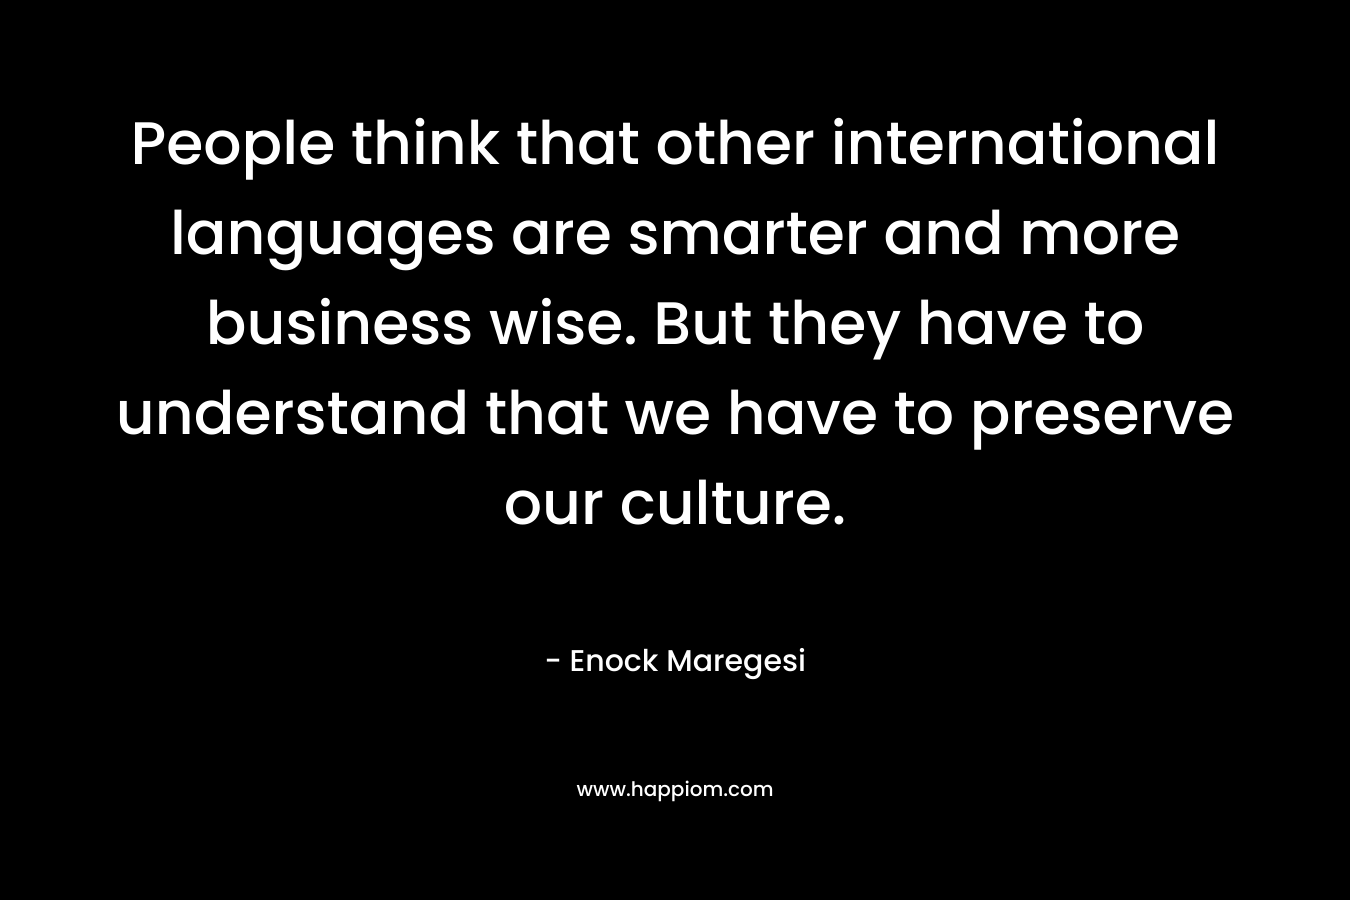 People think that other international languages are smarter and more business wise. But they have to understand that we have to preserve our culture. – Enock Maregesi